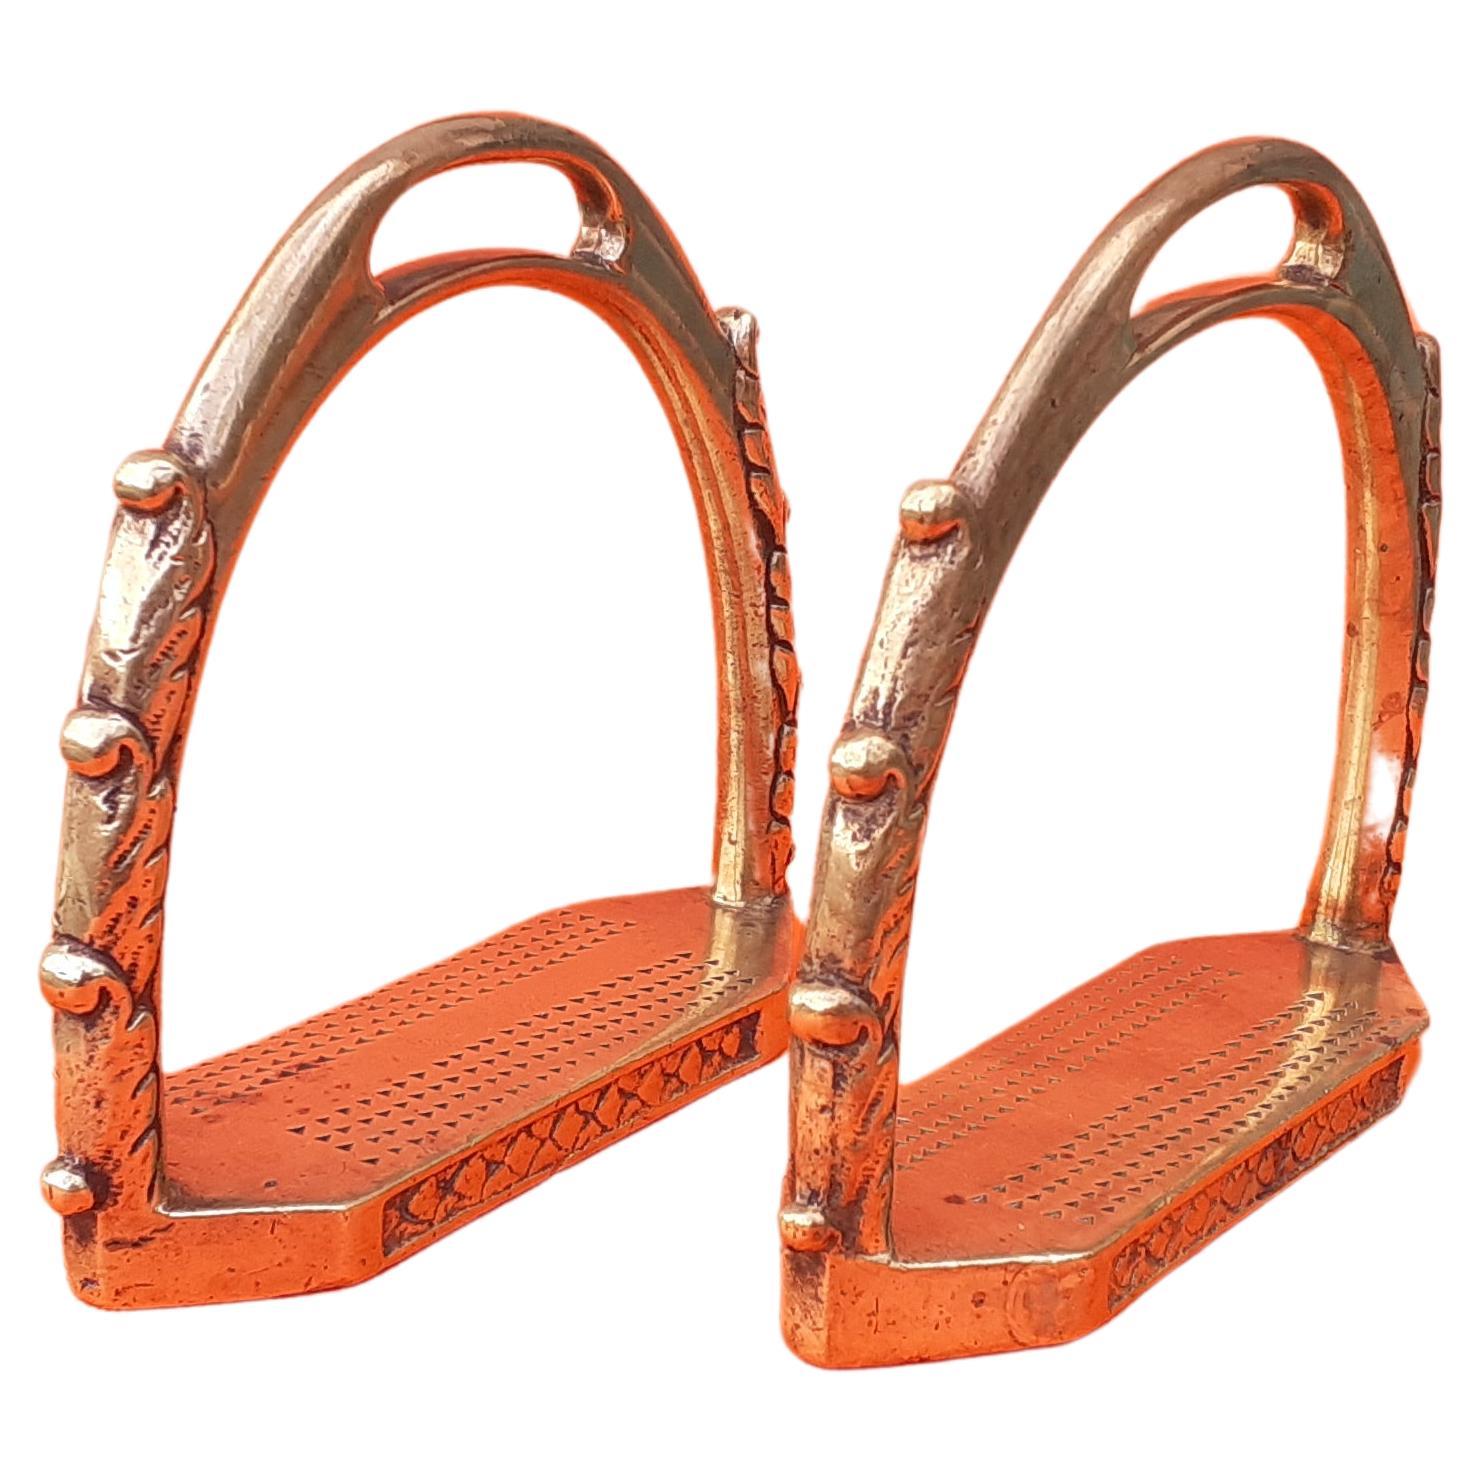 Exceptional Hermès Pair of Chiseled Bronze Stirrups Horse Ridding Texas For Sale 1